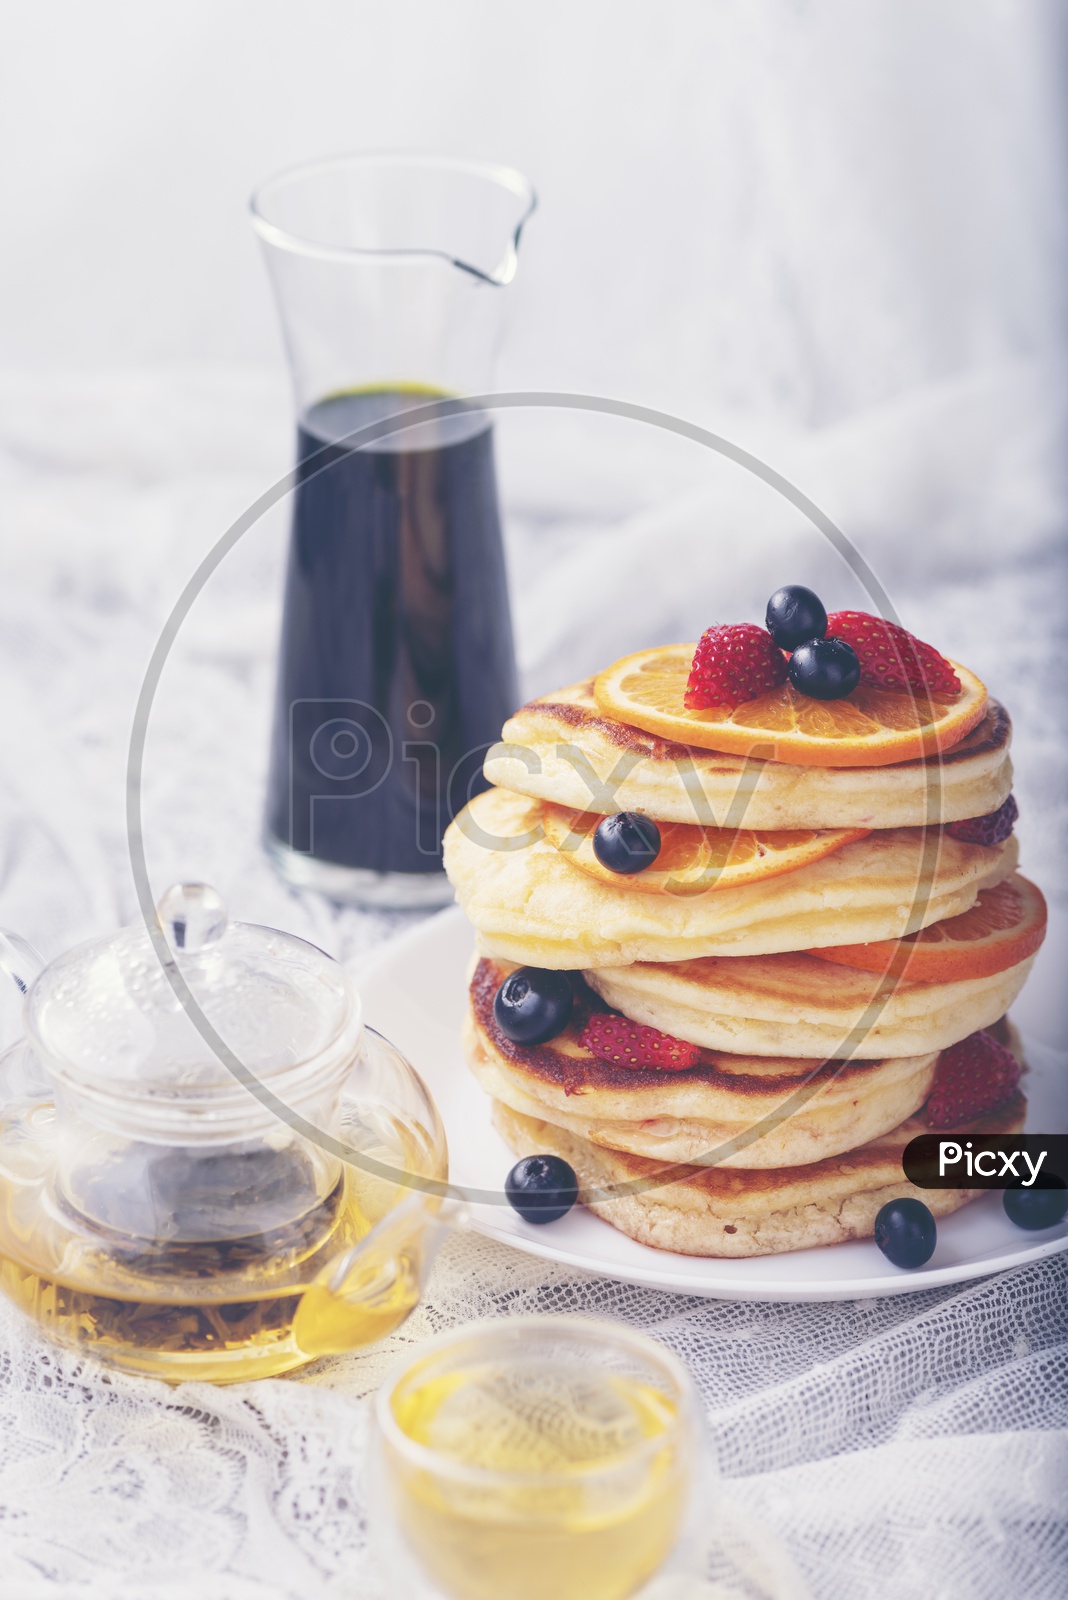 Stack of homemade thin pancakes or crepes in a Plate